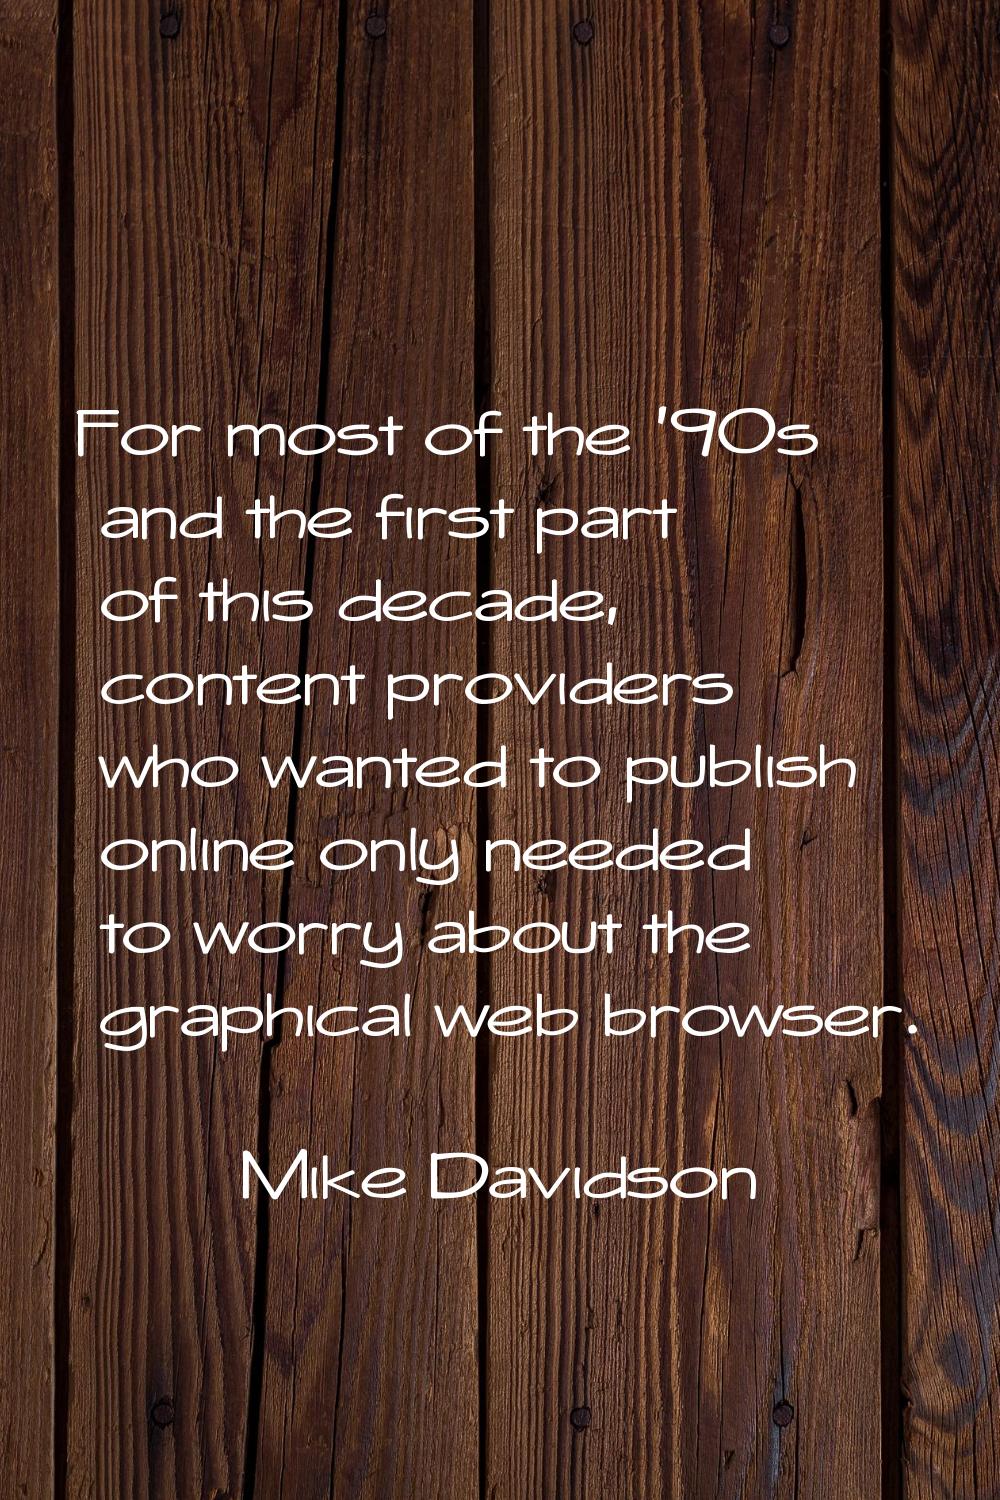 For most of the '90s and the first part of this decade, content providers who wanted to publish onl